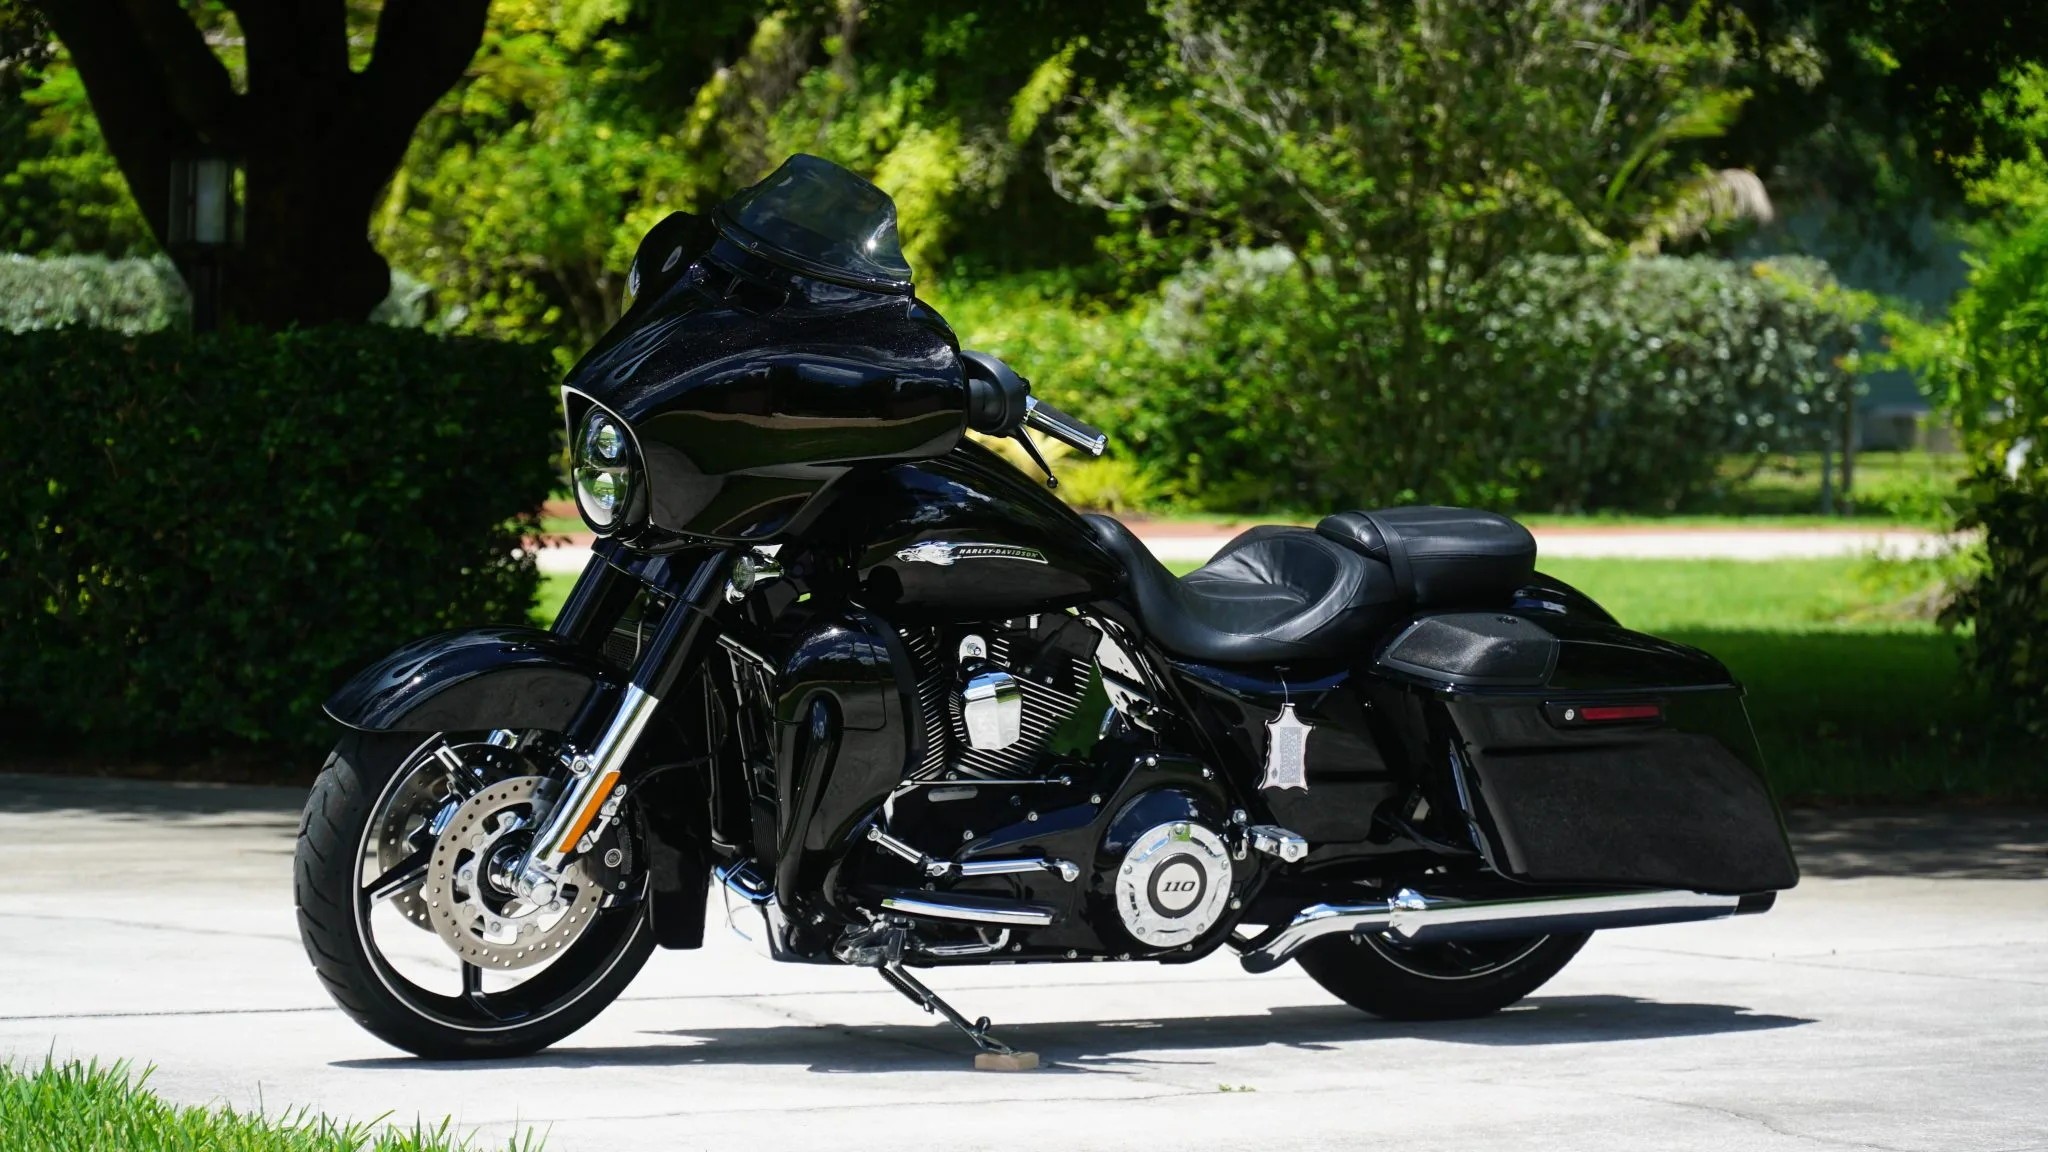 Immaculate Harley-Davidson CVO Street Glide Looks Fetching, Counts